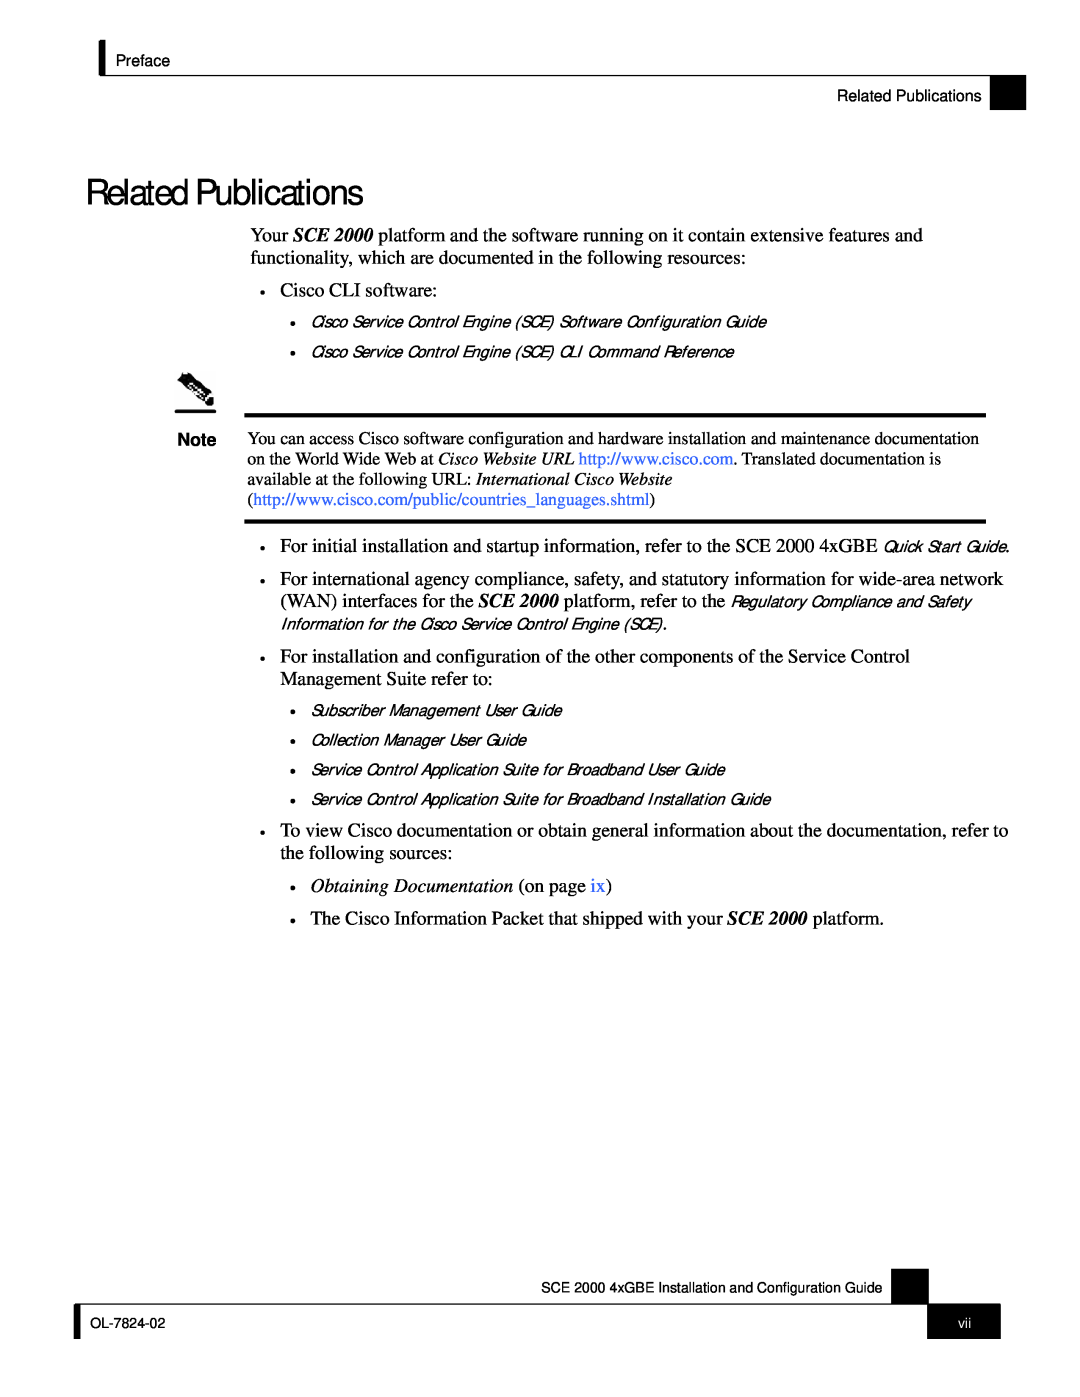 Cisco Systems SCE 2000 4xGBE manual Related Publications, Obtaining Documentation on page 